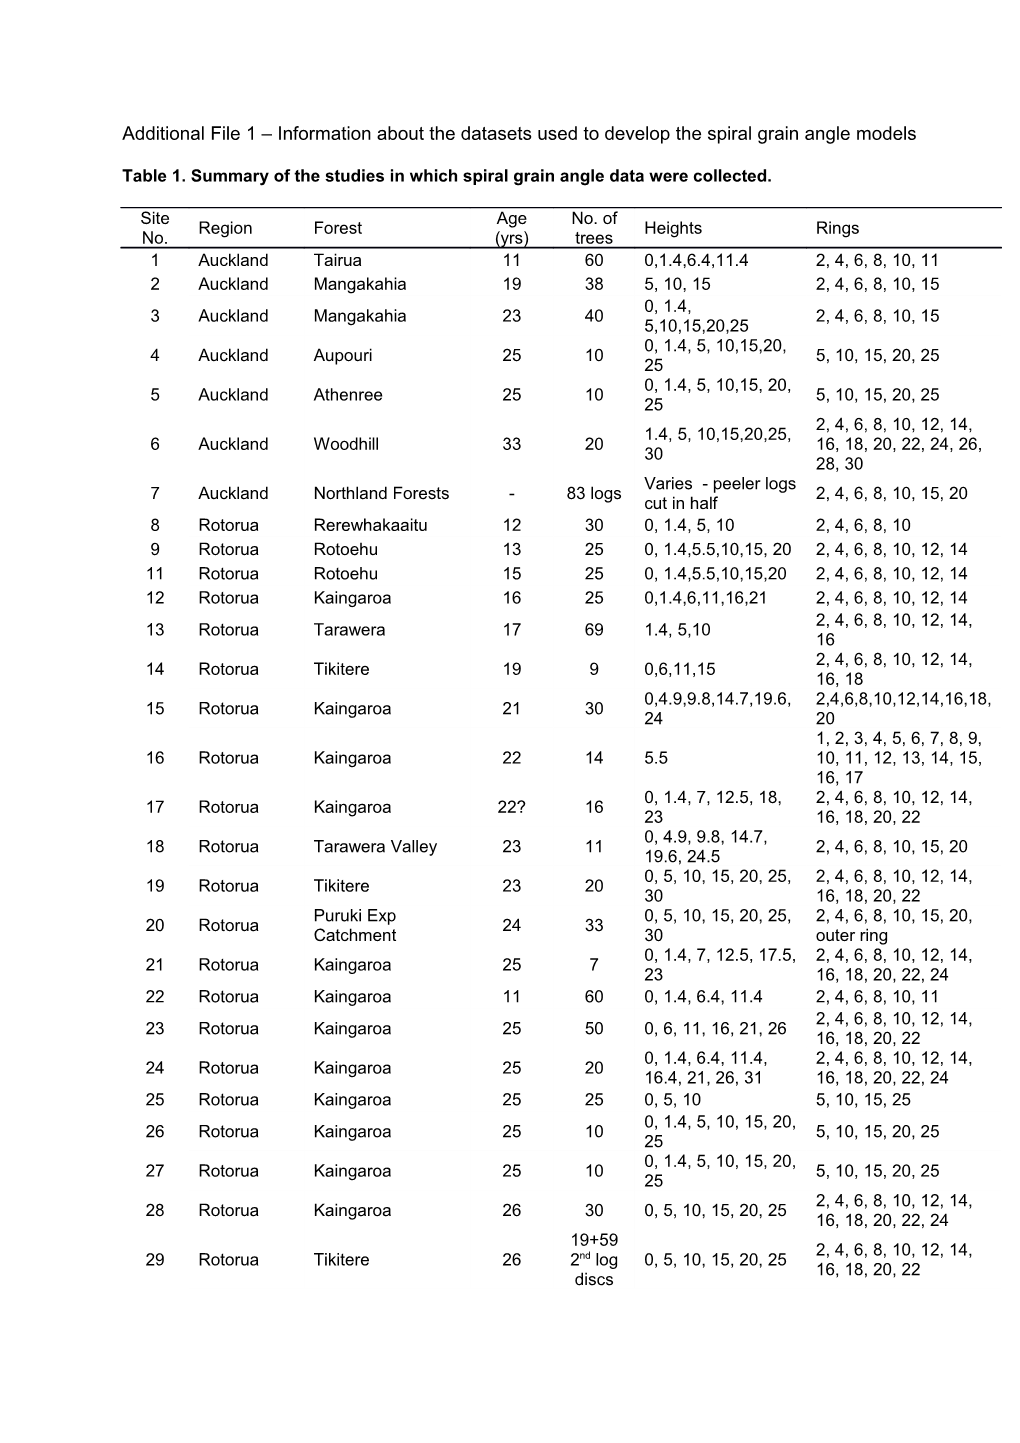 Table 1.Summary of the Studies in Which Spiral Grain Angle Data Were Collected